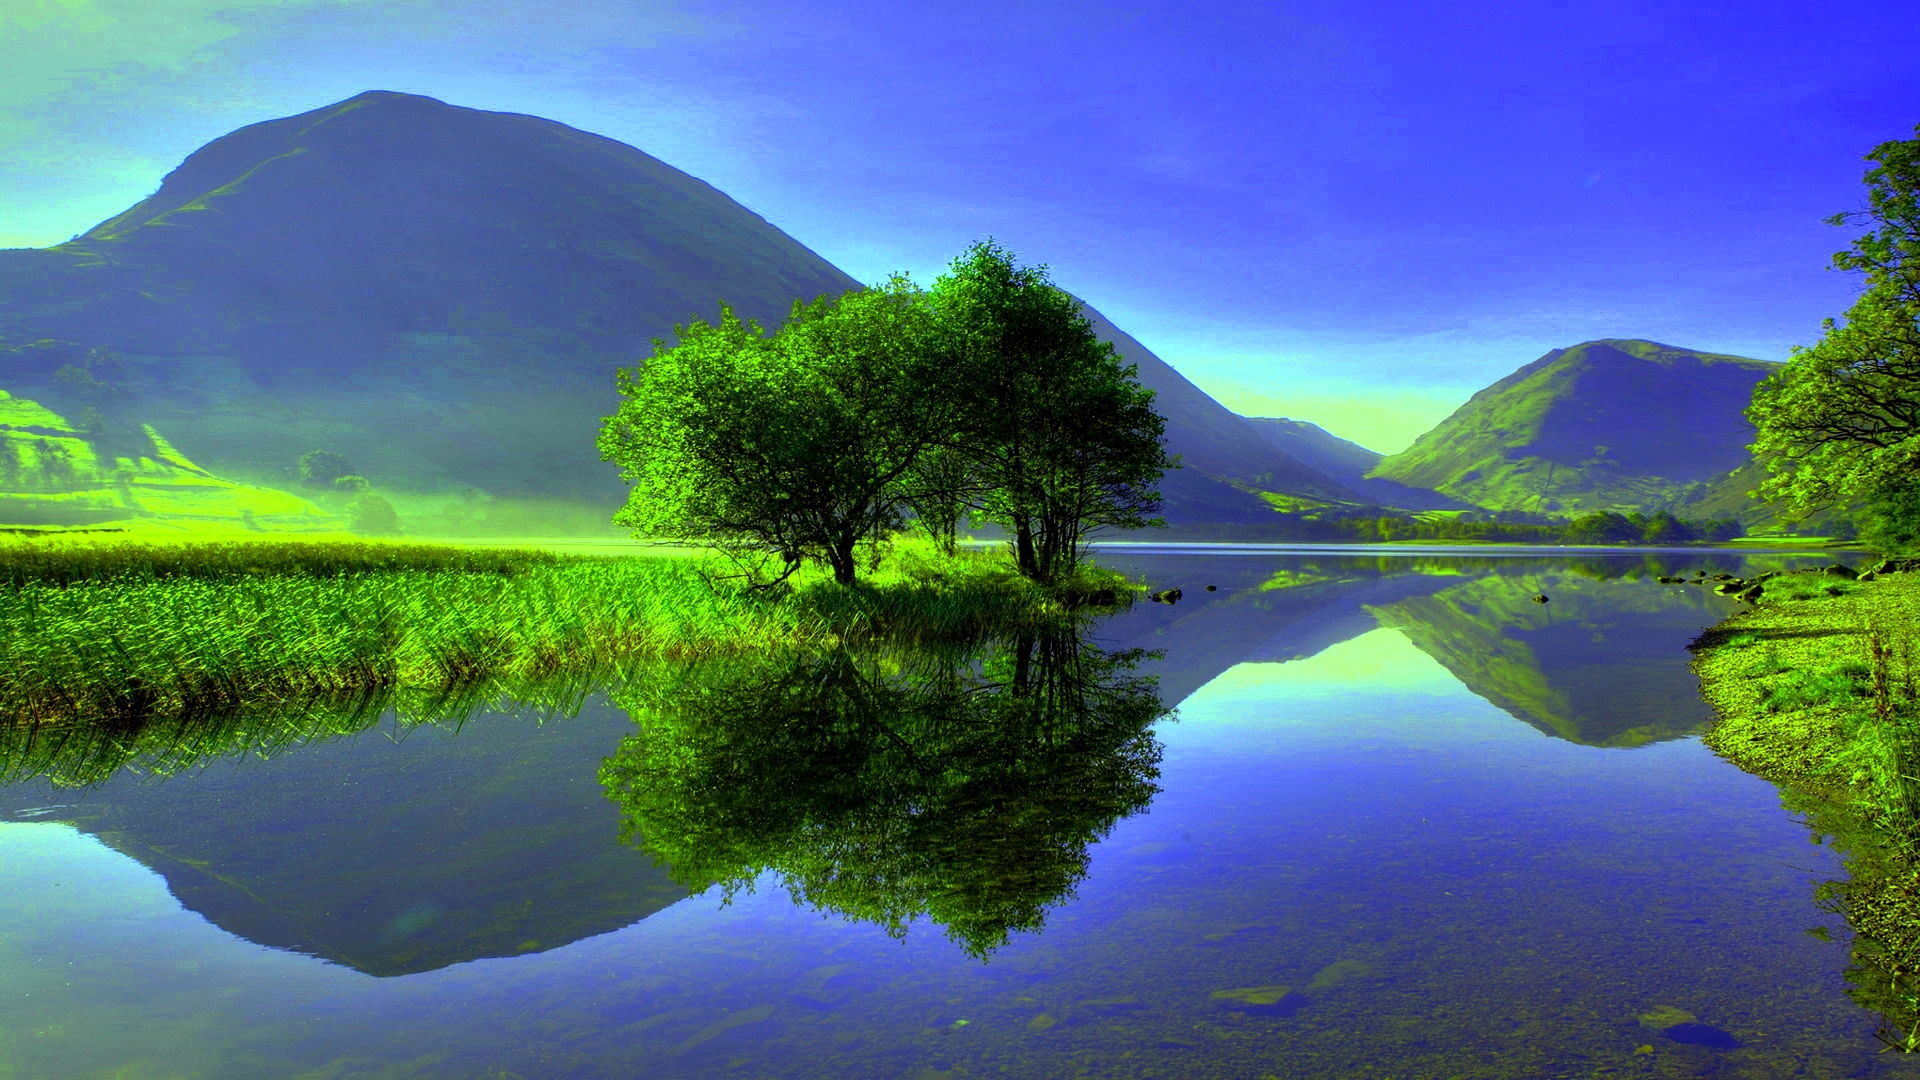 General 1920x1080 landscape mountains lake clear sky sky blue nature reflection trees